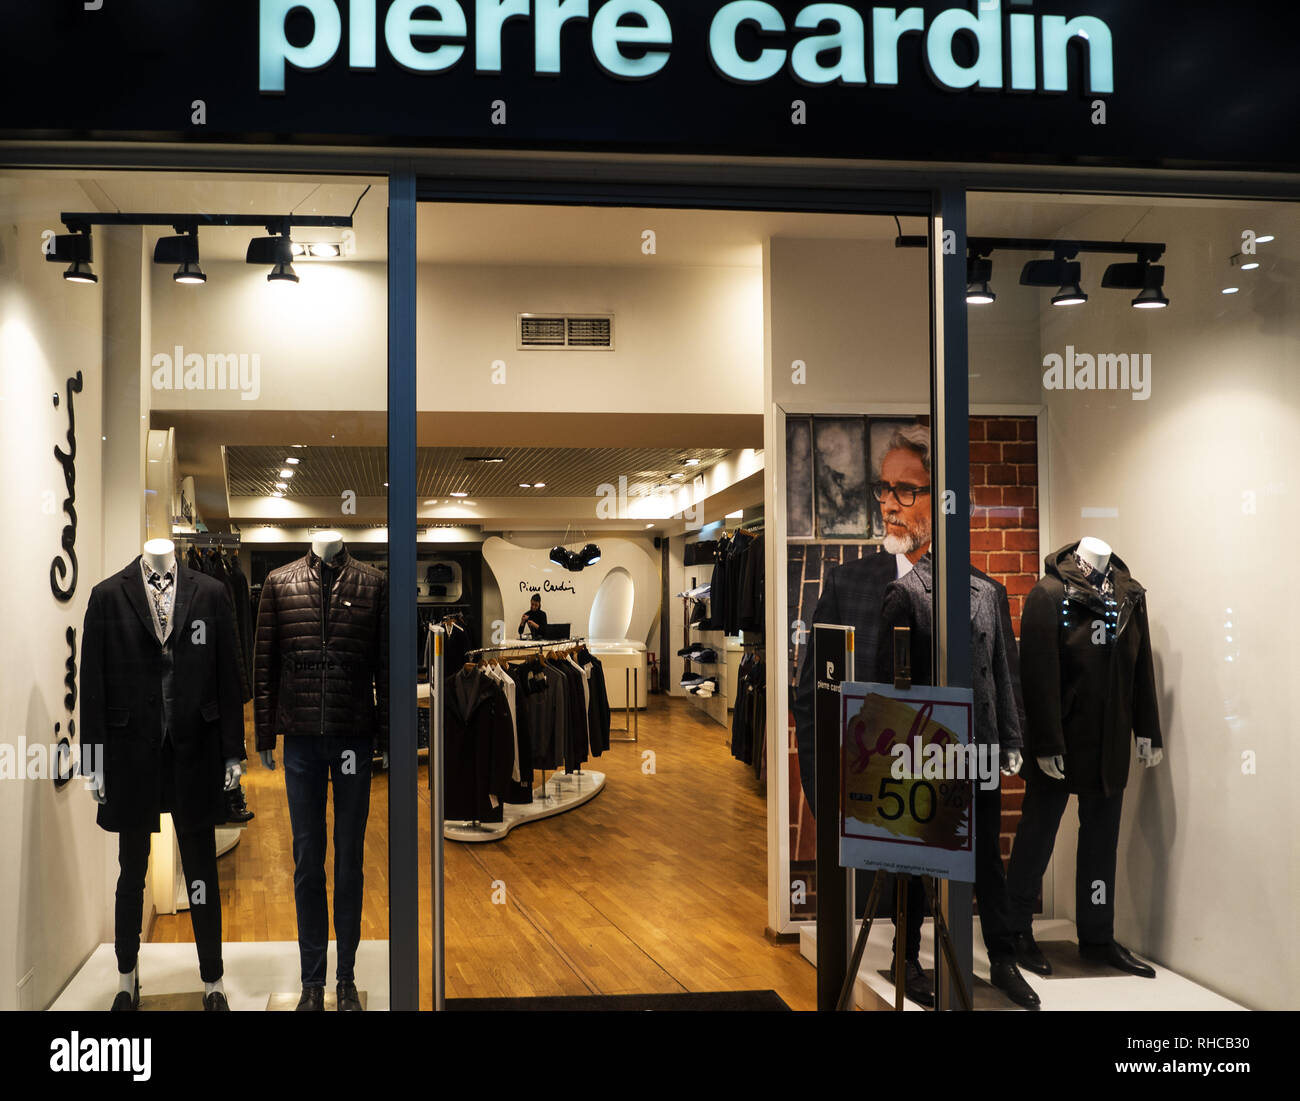 Pierre cardin hi-res stock photography and images - Alamy